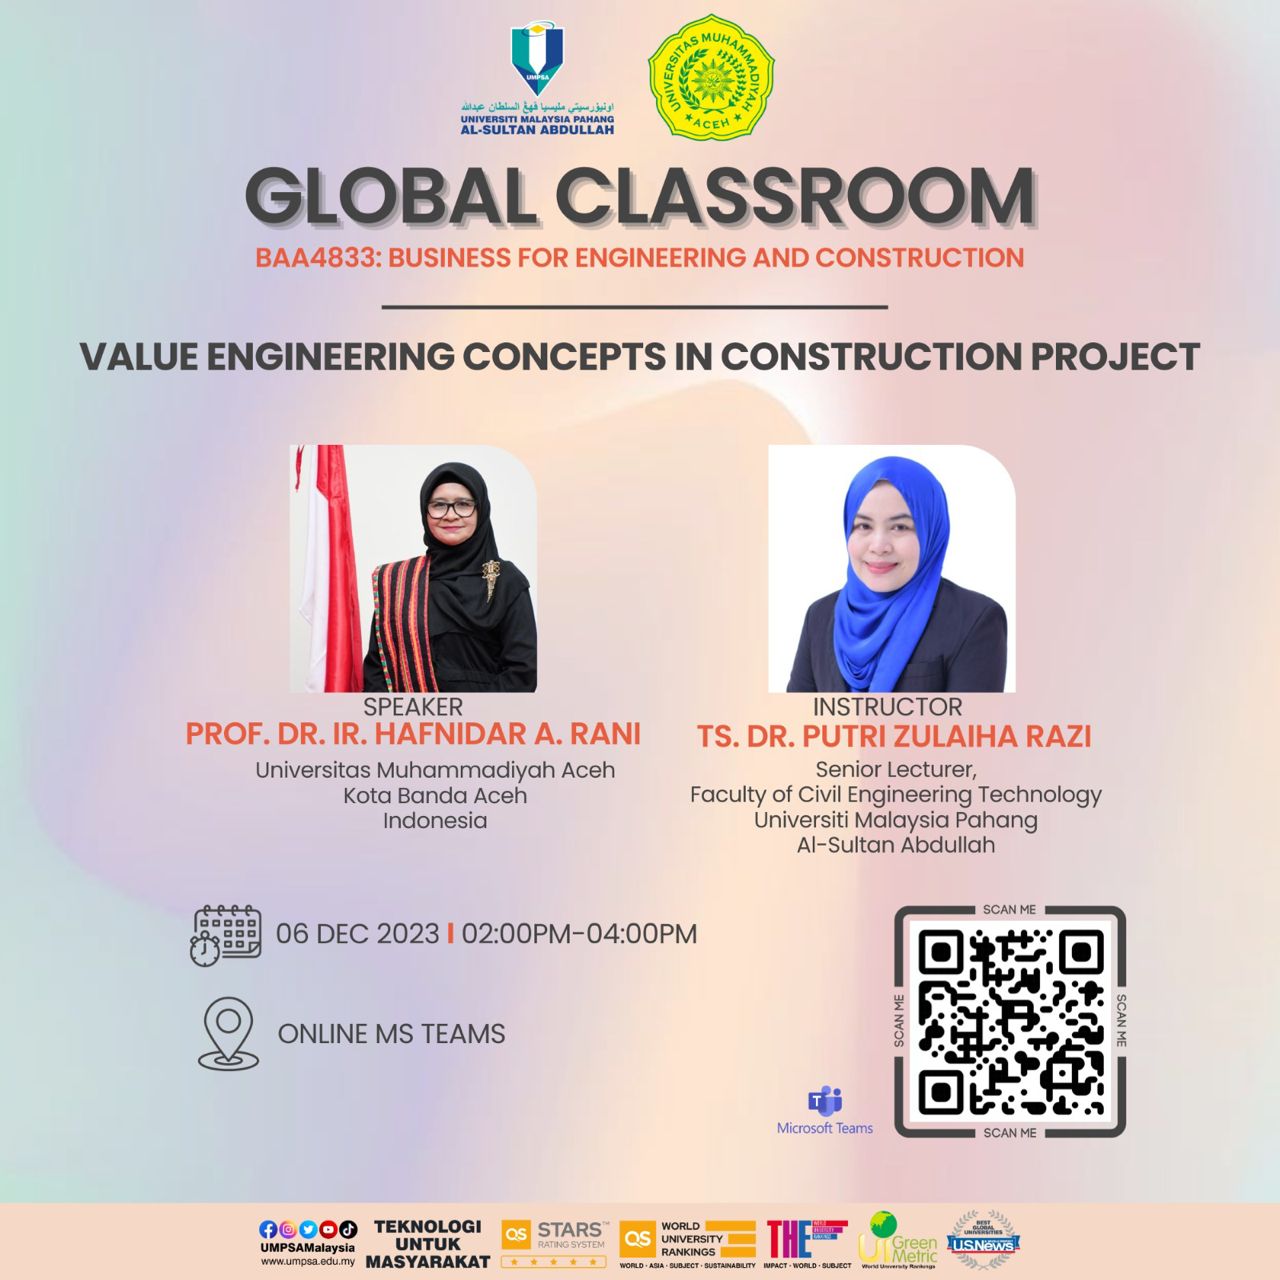 Global Classroom for BAA4833 Subject: Value Engineering Concepts in Consruction Project on 6th December 2023 conducted by Ts. Dr. Putri Zulaiha Razi, Senior Lecturer, Faculty of Civil Engineering & Technology, UMPSA 